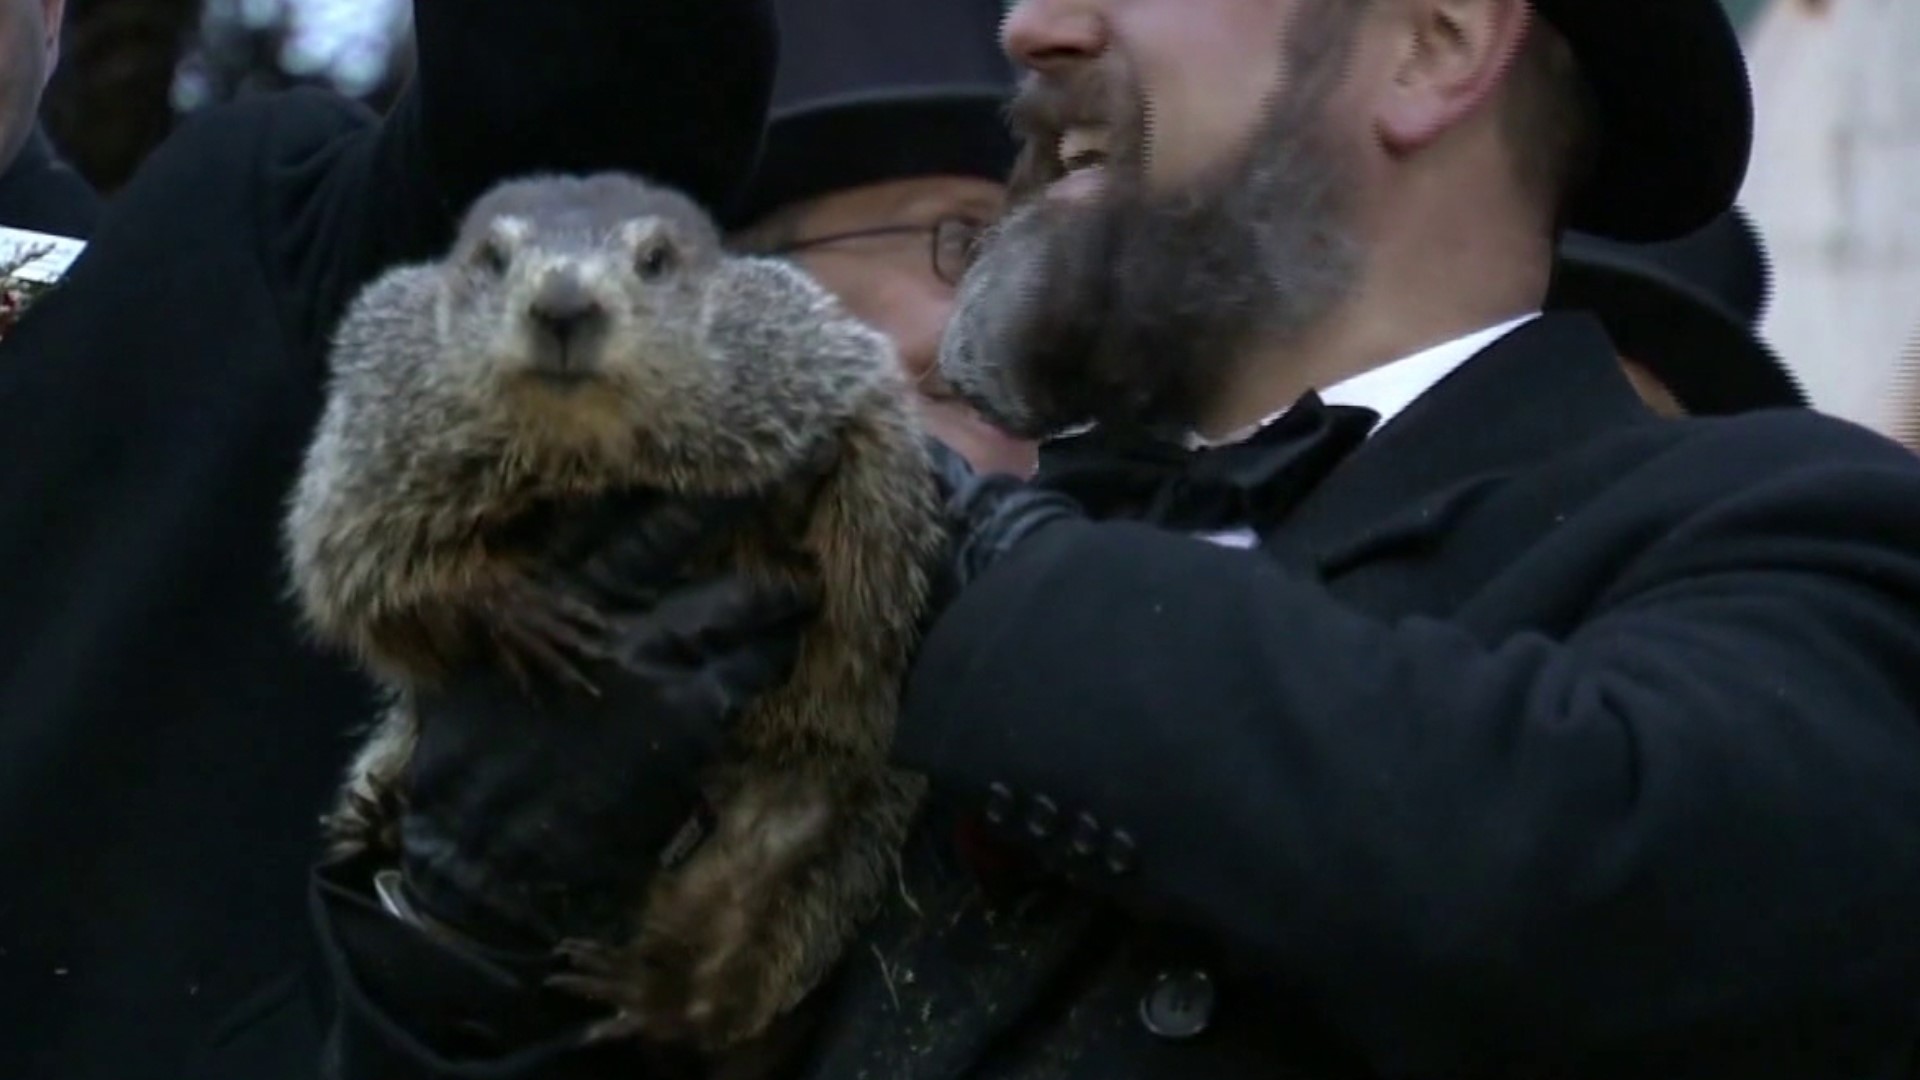 The Punxsutawney Groundhog Club has announced the birth of two babies to Phil and his wife, Phyllis.